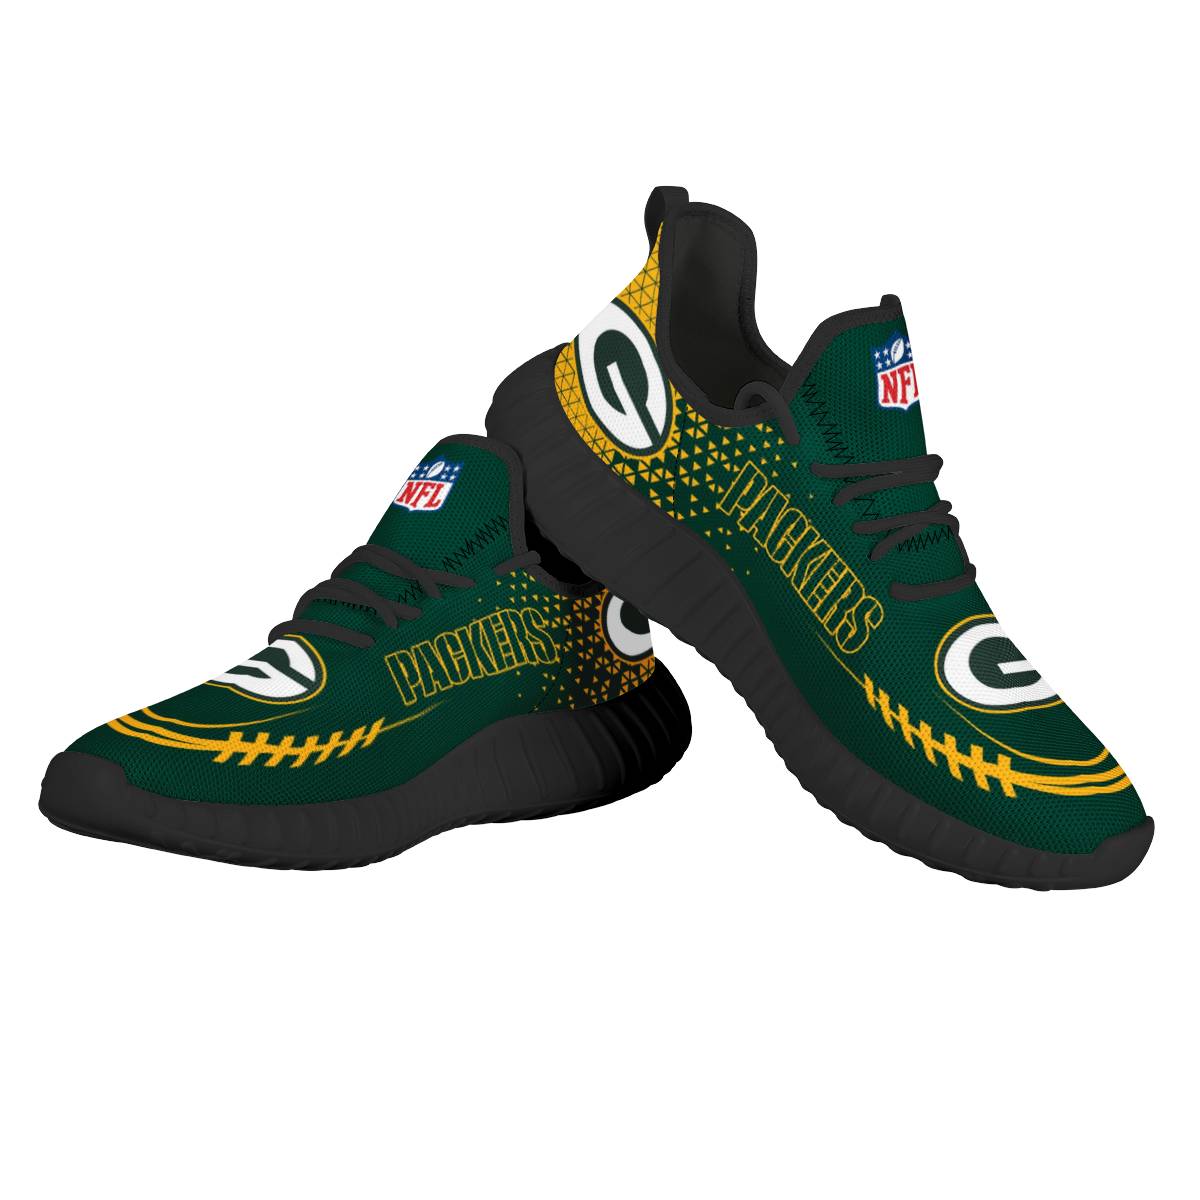 Men's NFL Green Bay Packers Mesh Knit Sneakers/Shoes 002